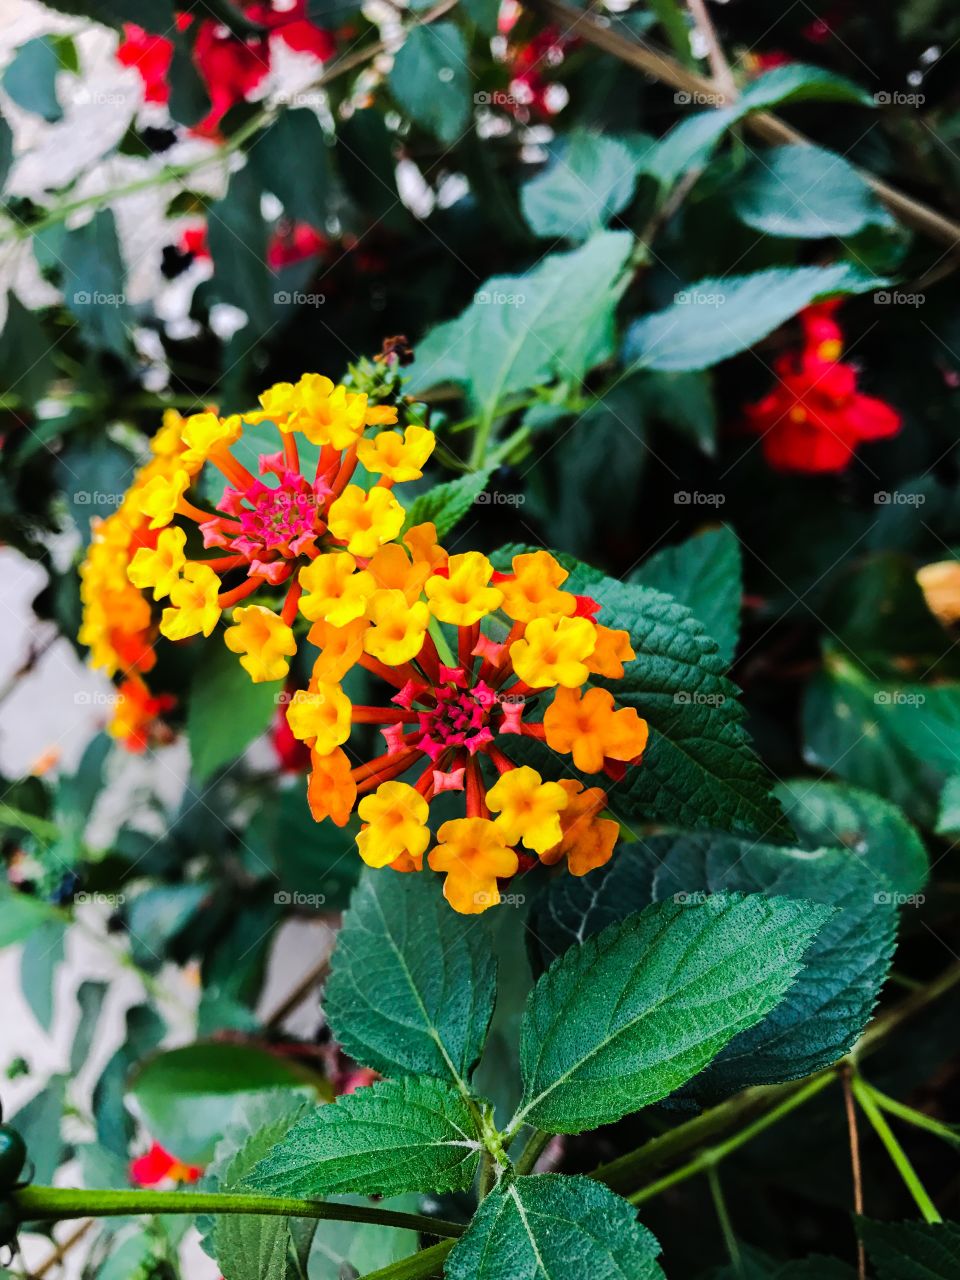 Autumn flowers and foliage 